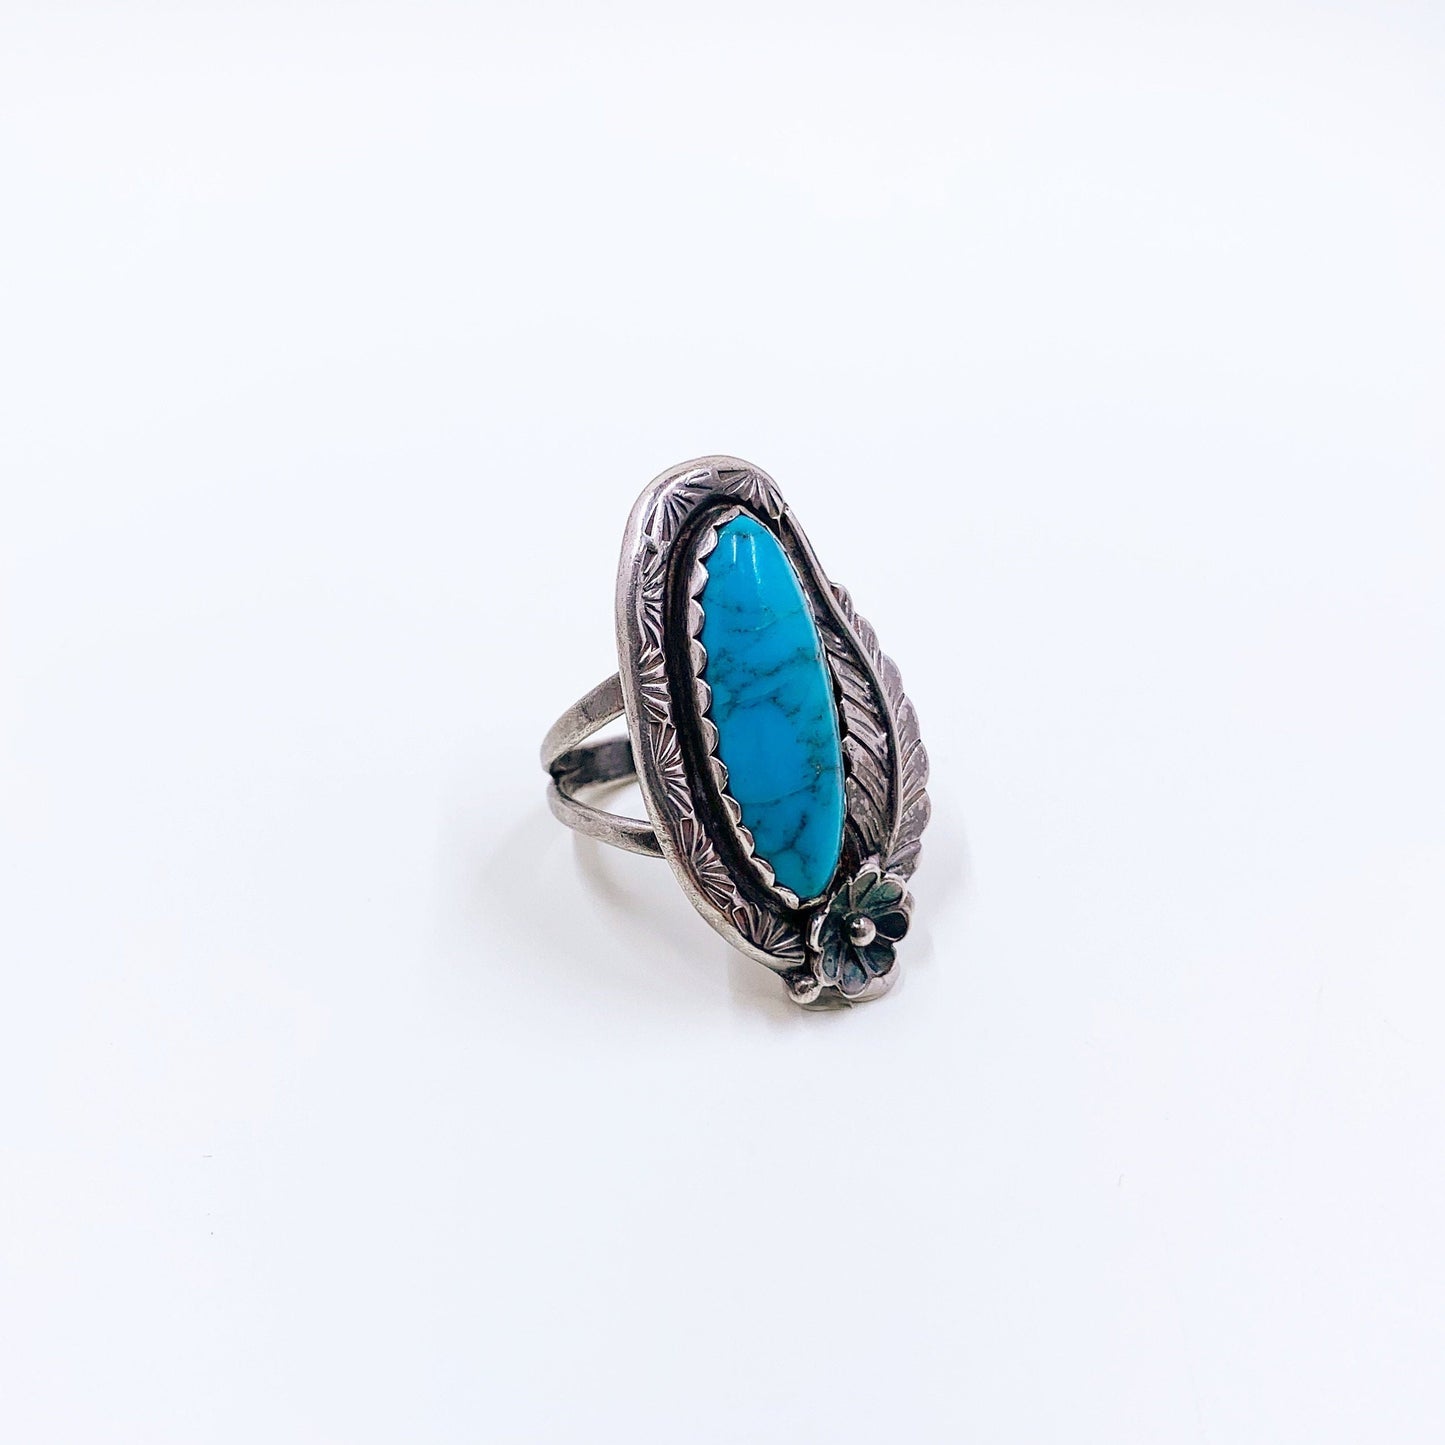 Vintage Sterling Turquoise Flower and Leaf Ring | Southwest Turquoise Stamped Ring | Size 7 1/2 Ring